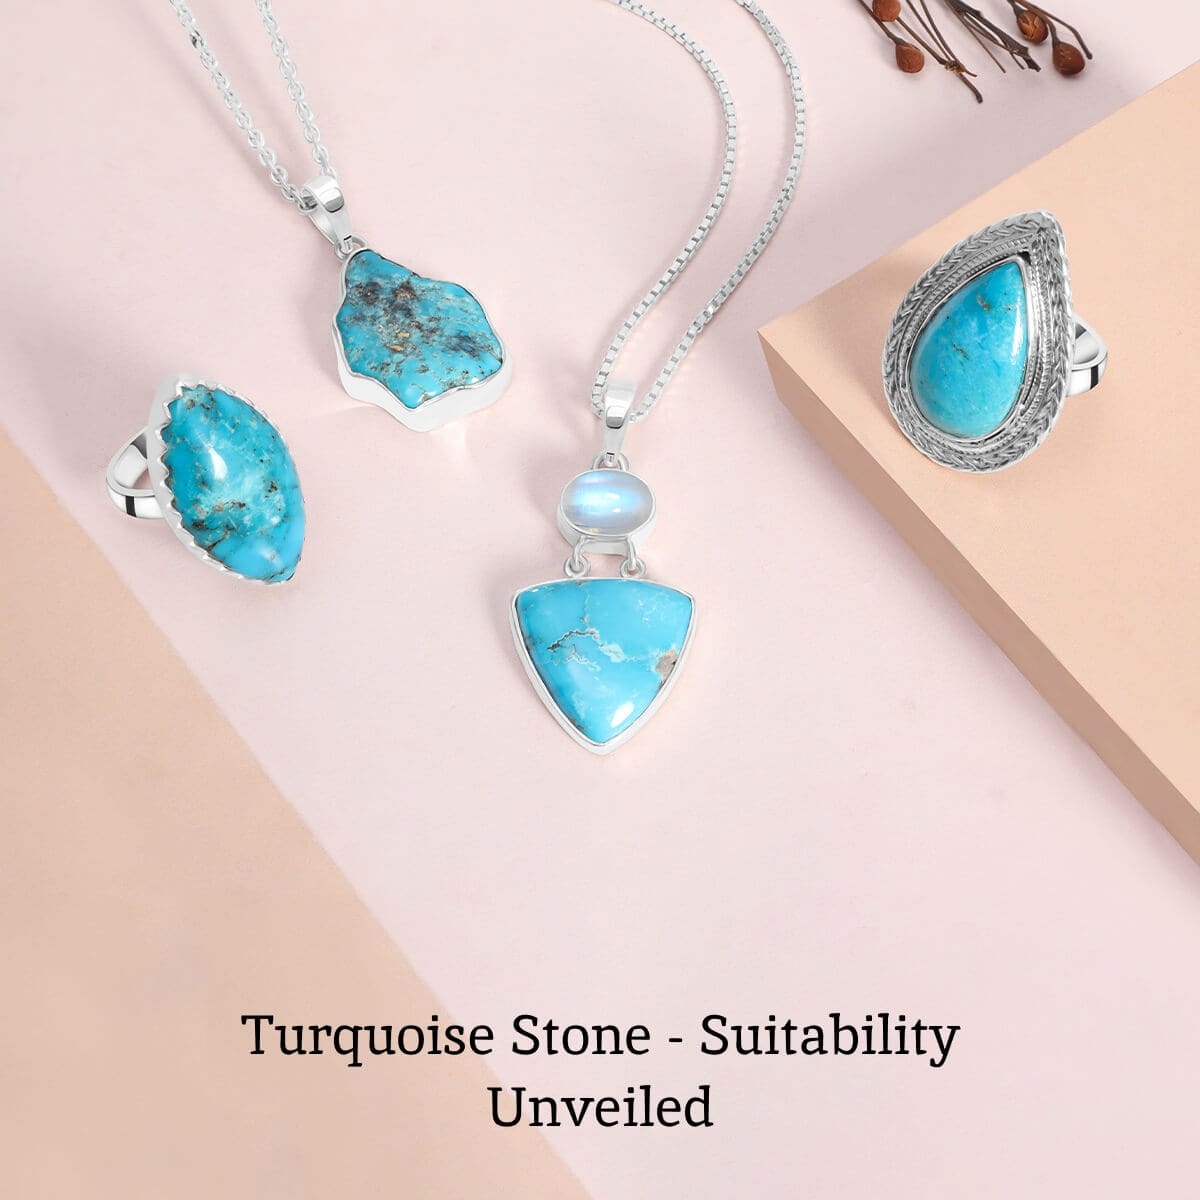 Who Should Wear Turquoise Stone?